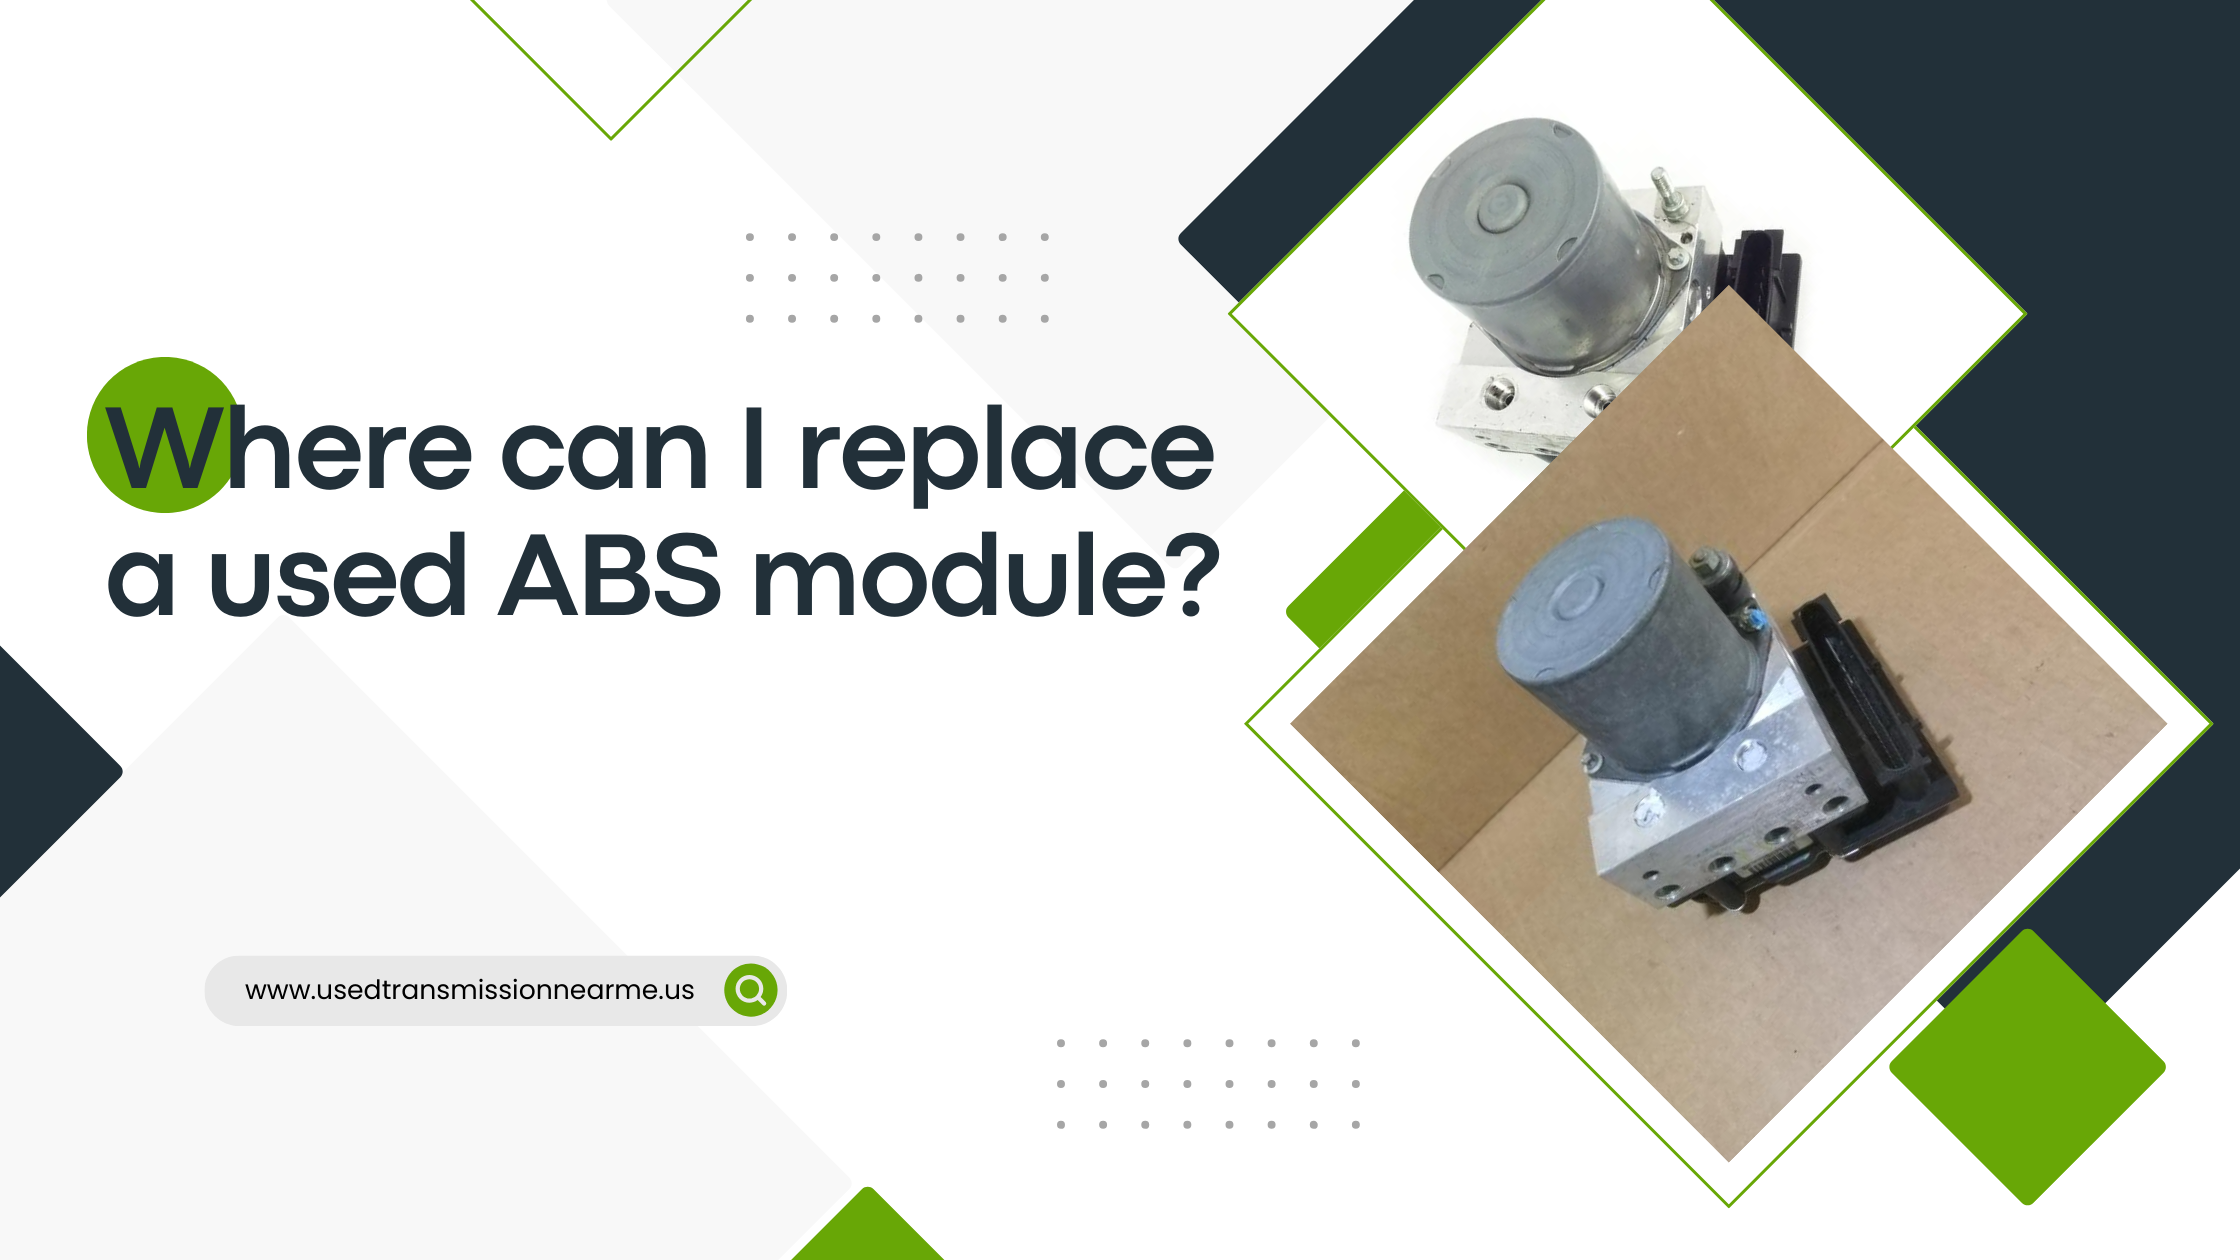 When Should I Replace the Failing ABS Module with a New or Used ABS Module in the US